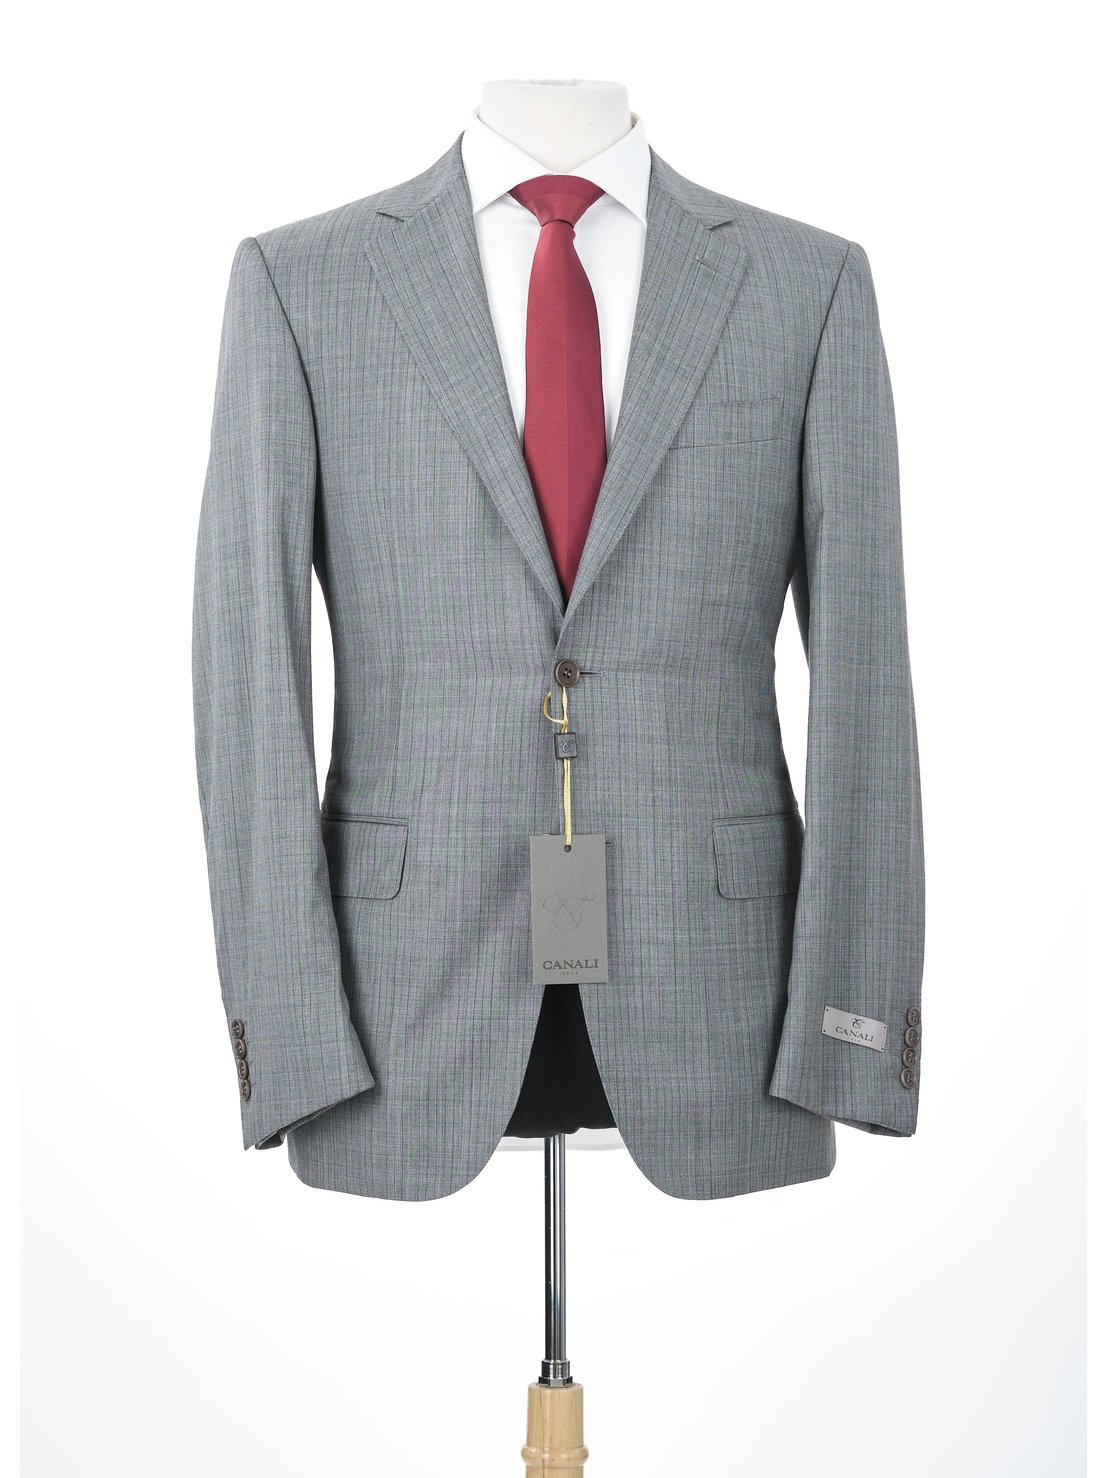 Canali 1934 Mens Light Gray Striped 44R Drop 7 100% Wool 2 Button 2 Piece Suit